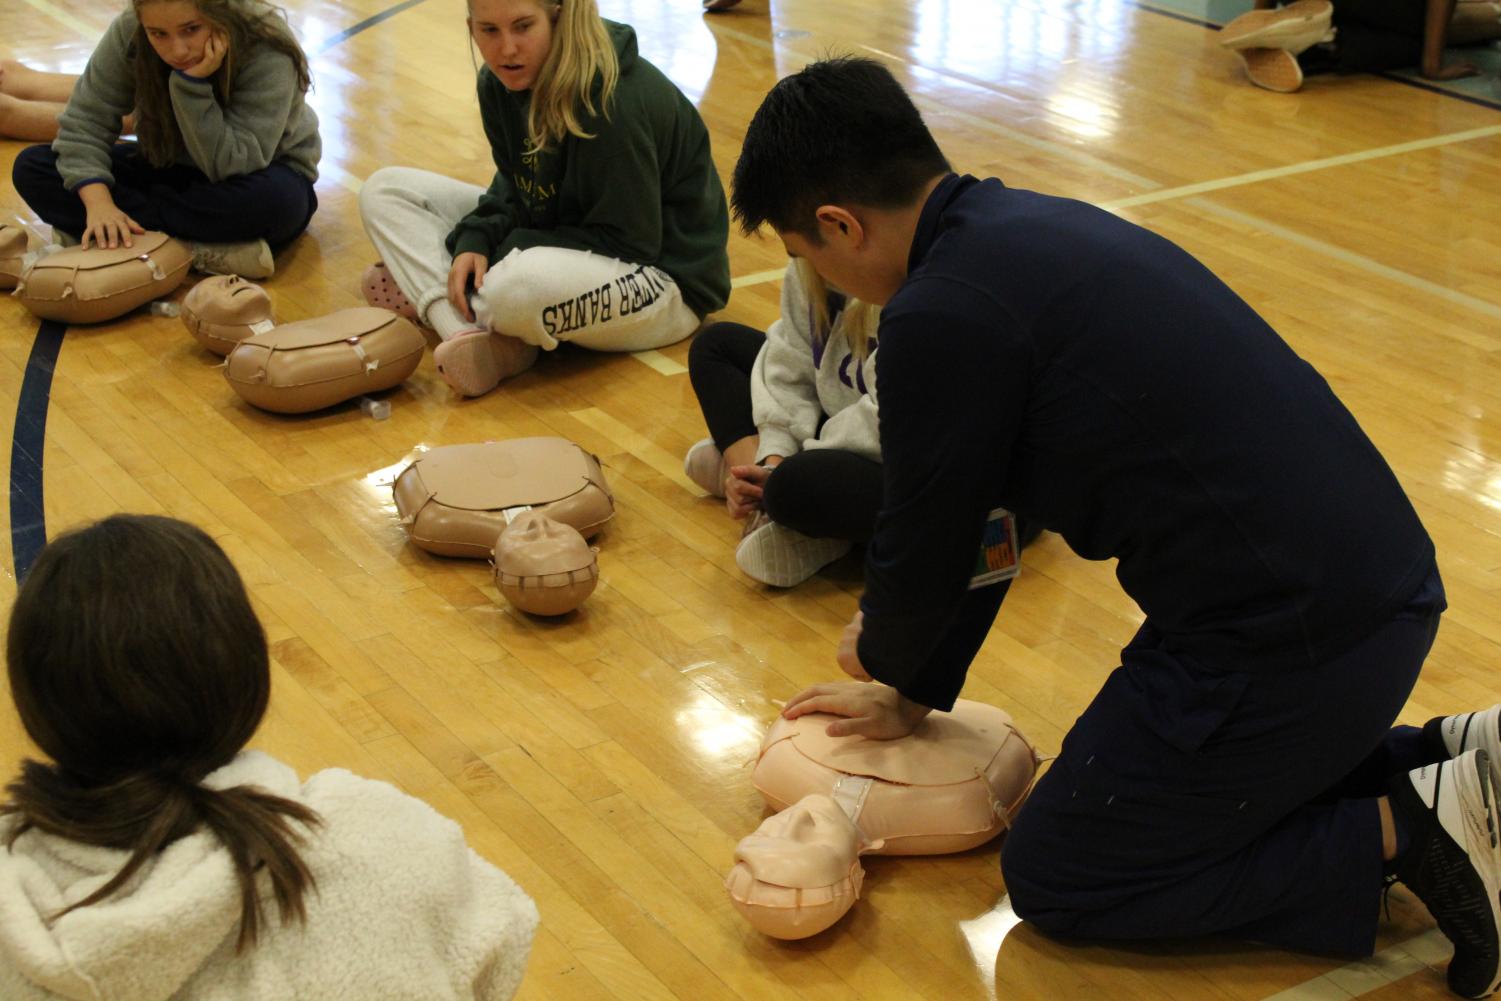 Instructors showed students how to properly perform CPR.